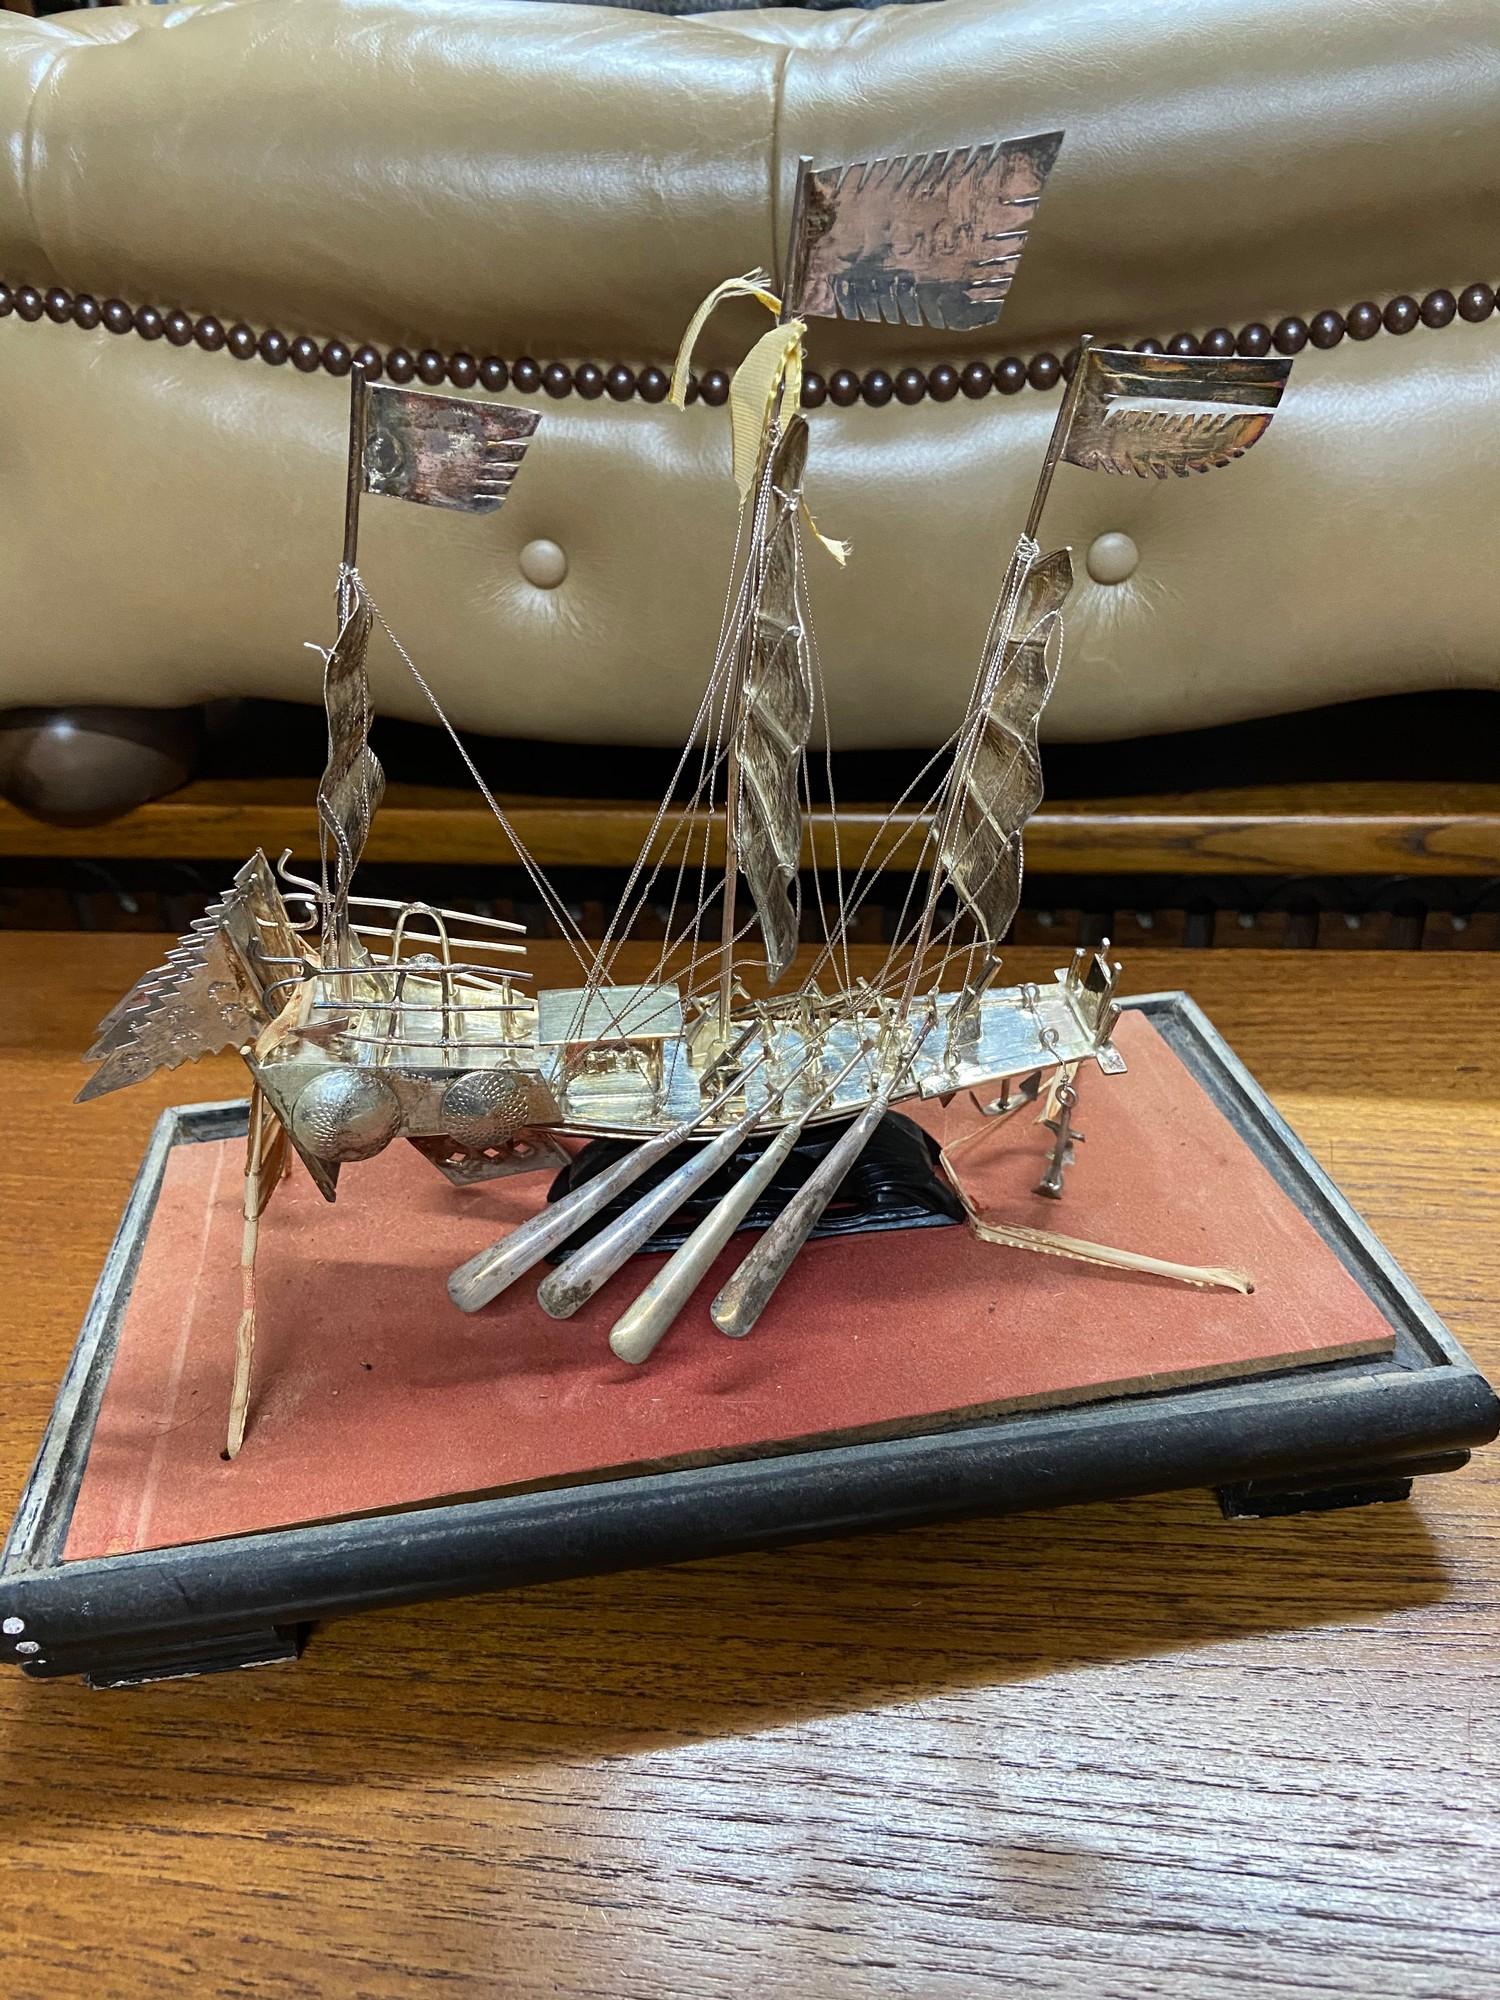 A Silver Chinese Junk boat model within a glass display. [Ship model stands 20cm in height]